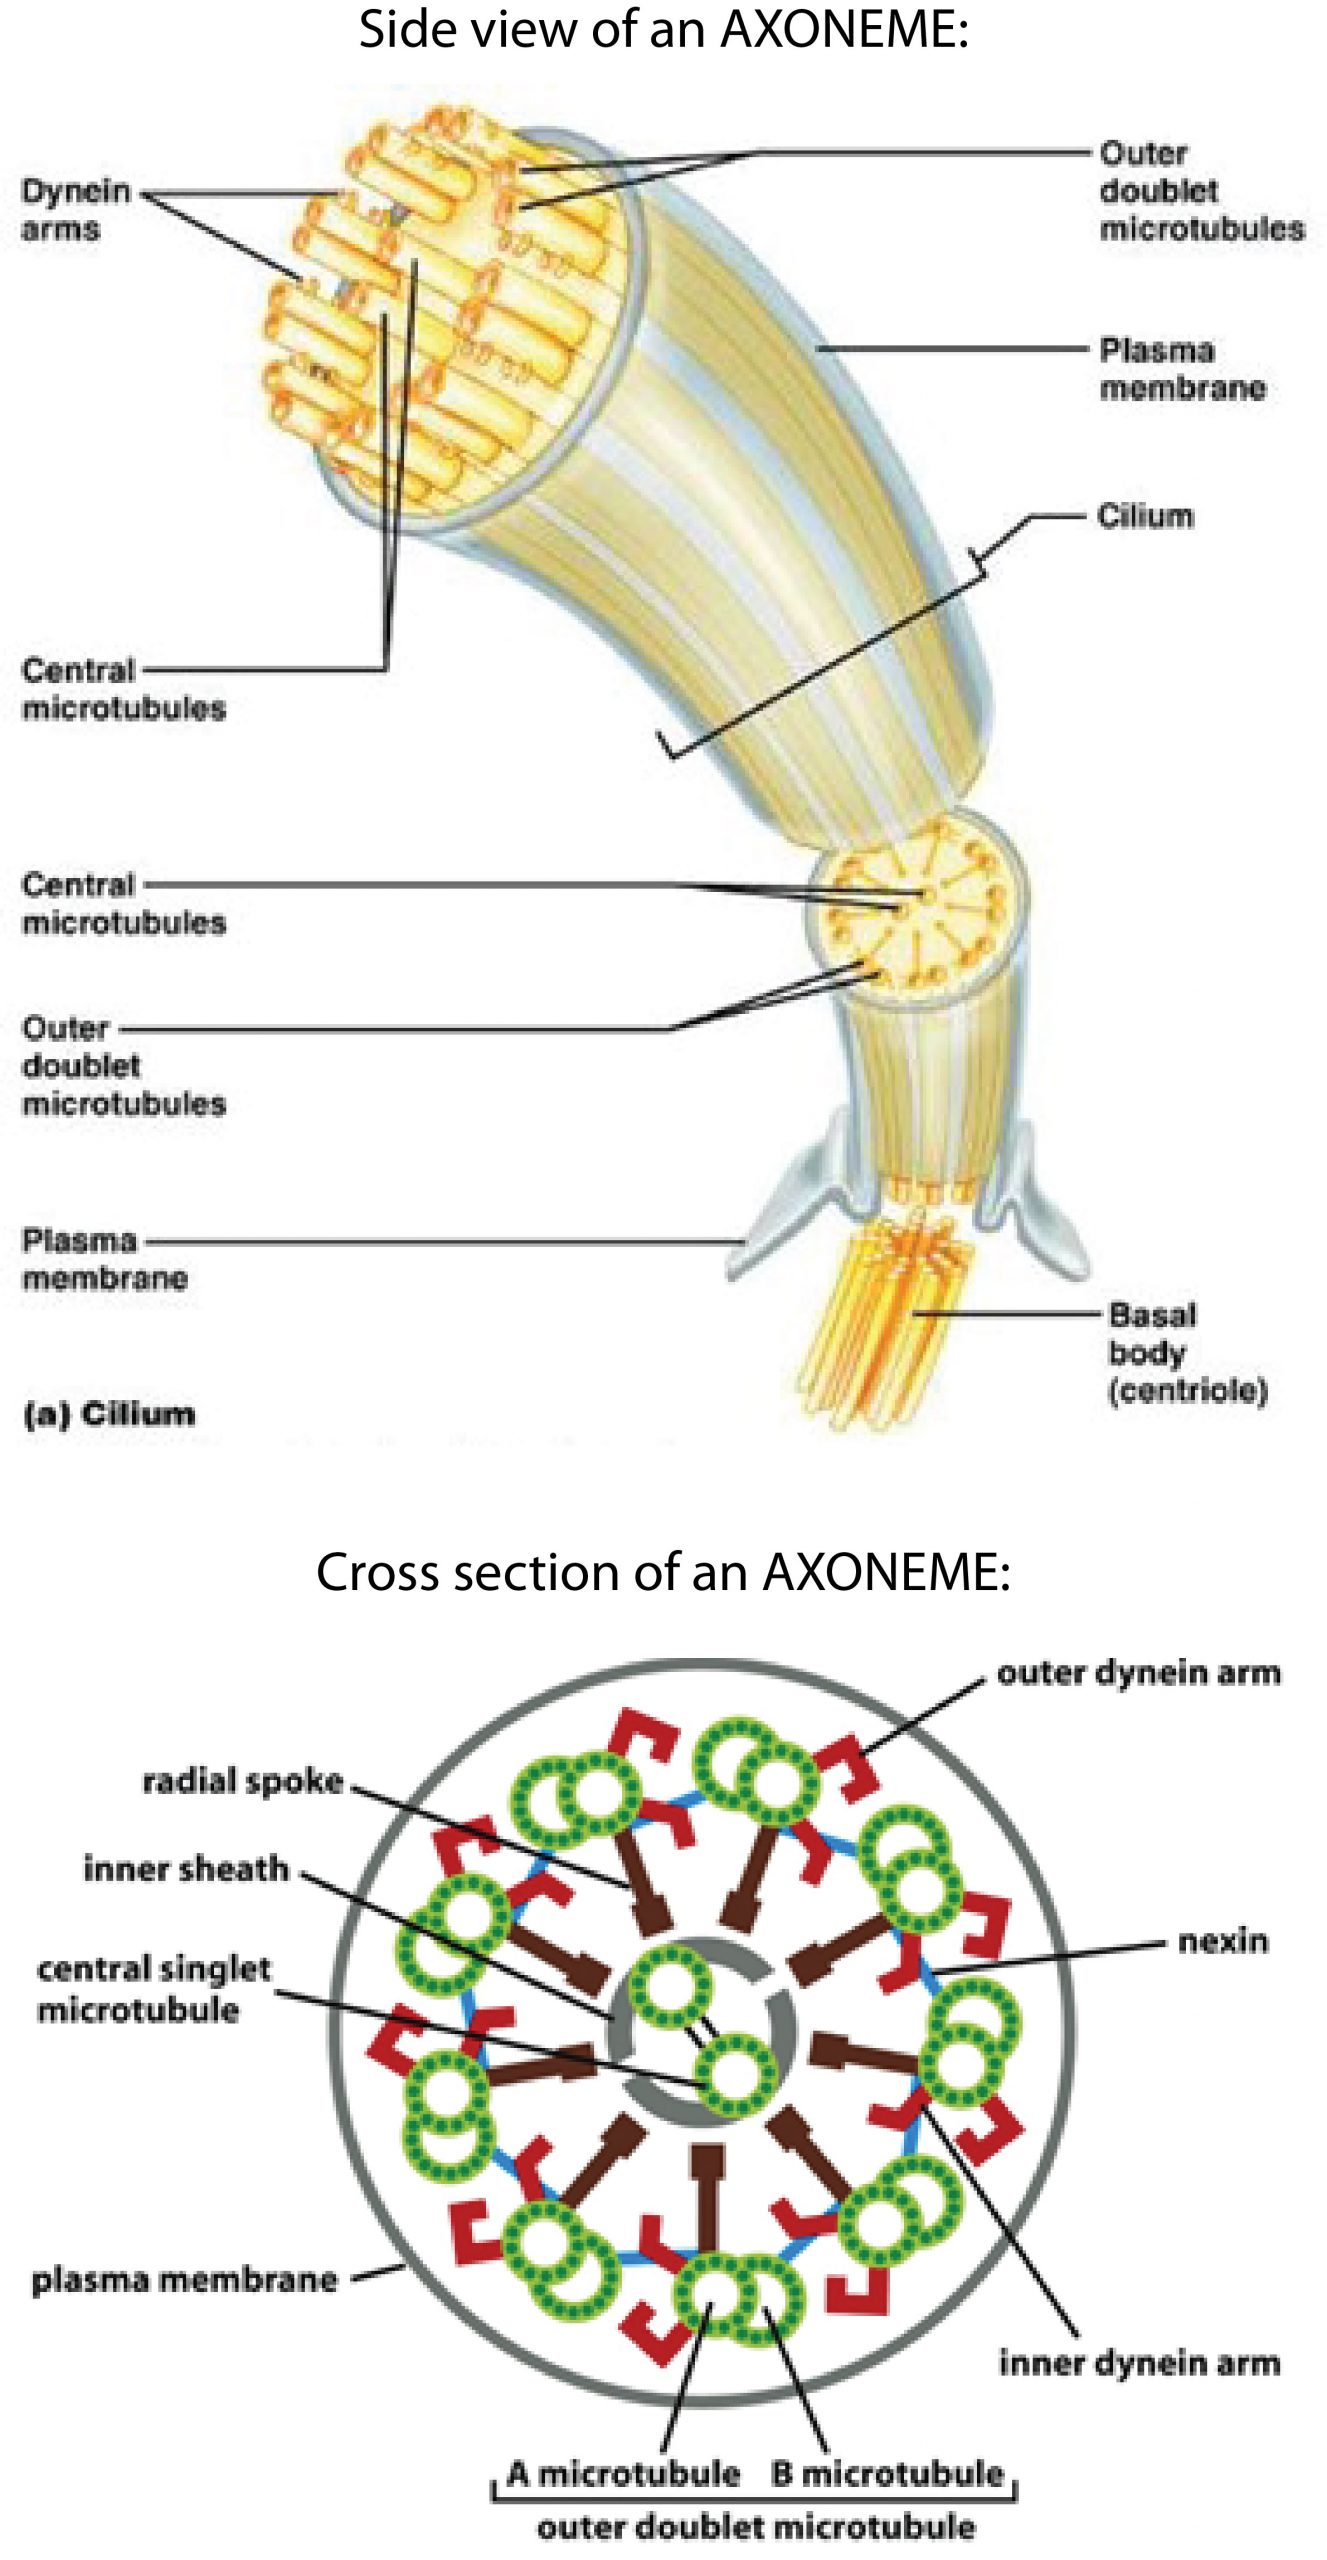 Structure of an axoneme